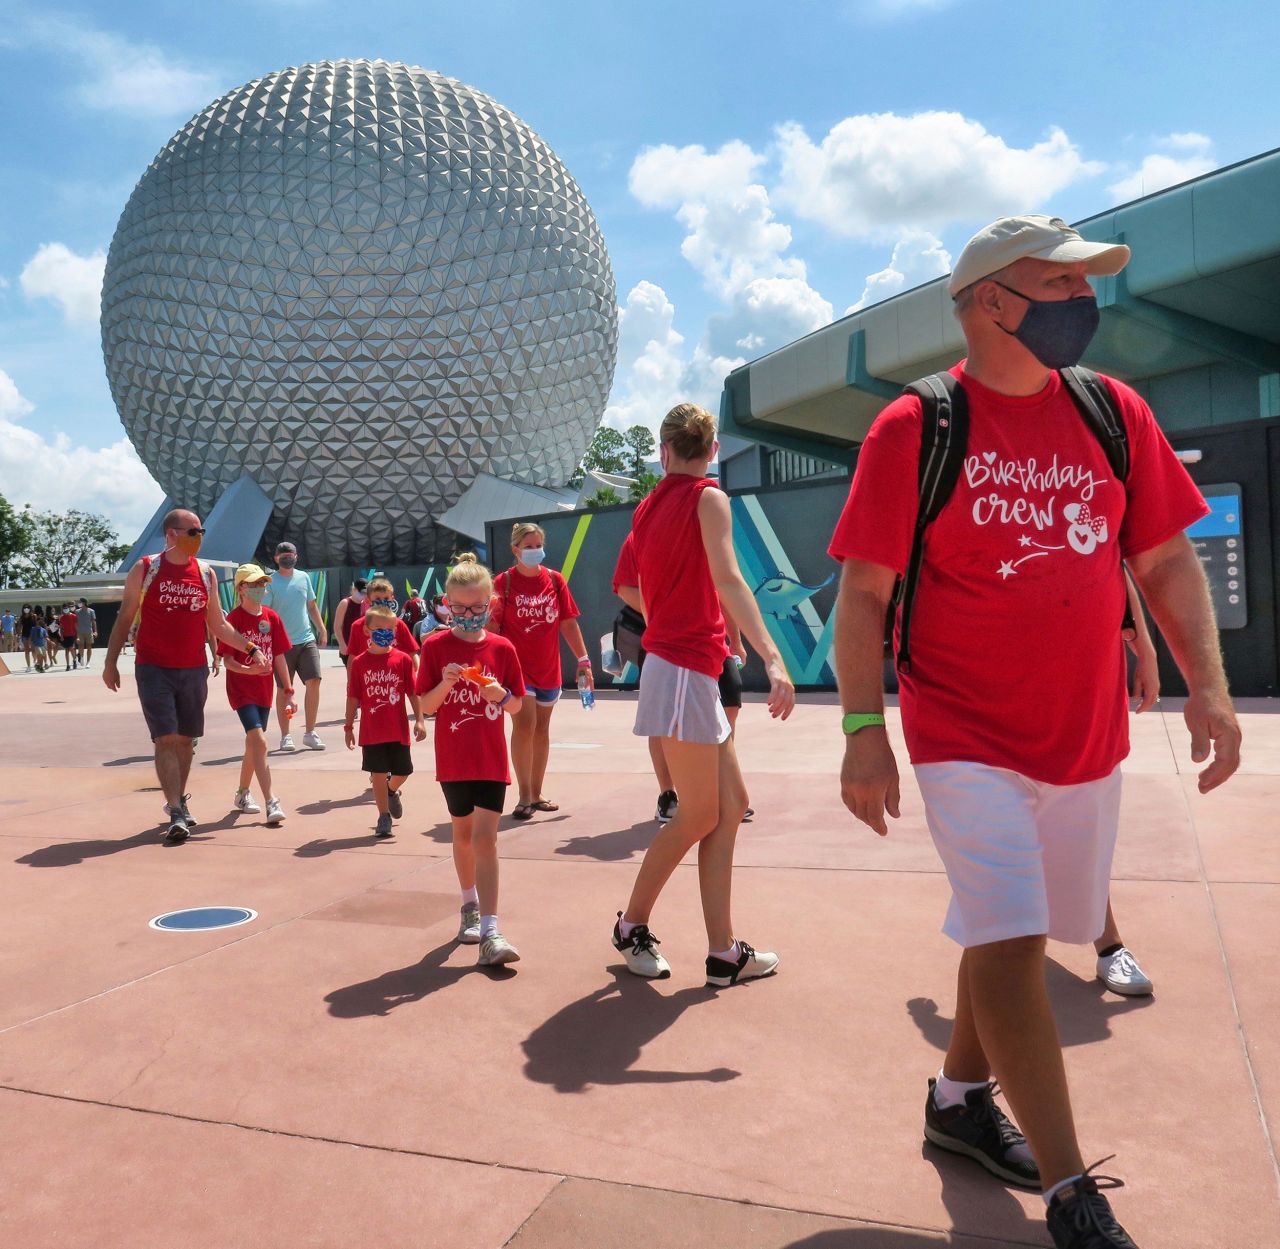 Guests arrive at Disney's Epcot park in Lake Buena Vista, Florida, on July 15. <a href="index.php?page=&url=https%3A%2F%2Fwww.cnn.com%2Ftravel%2Farticle%2Fdisney-world-epcot-reopens%2Findex.html" target="_blank">The park was reopening,</a> as was Hollywood Studios, for the first time since March 15.